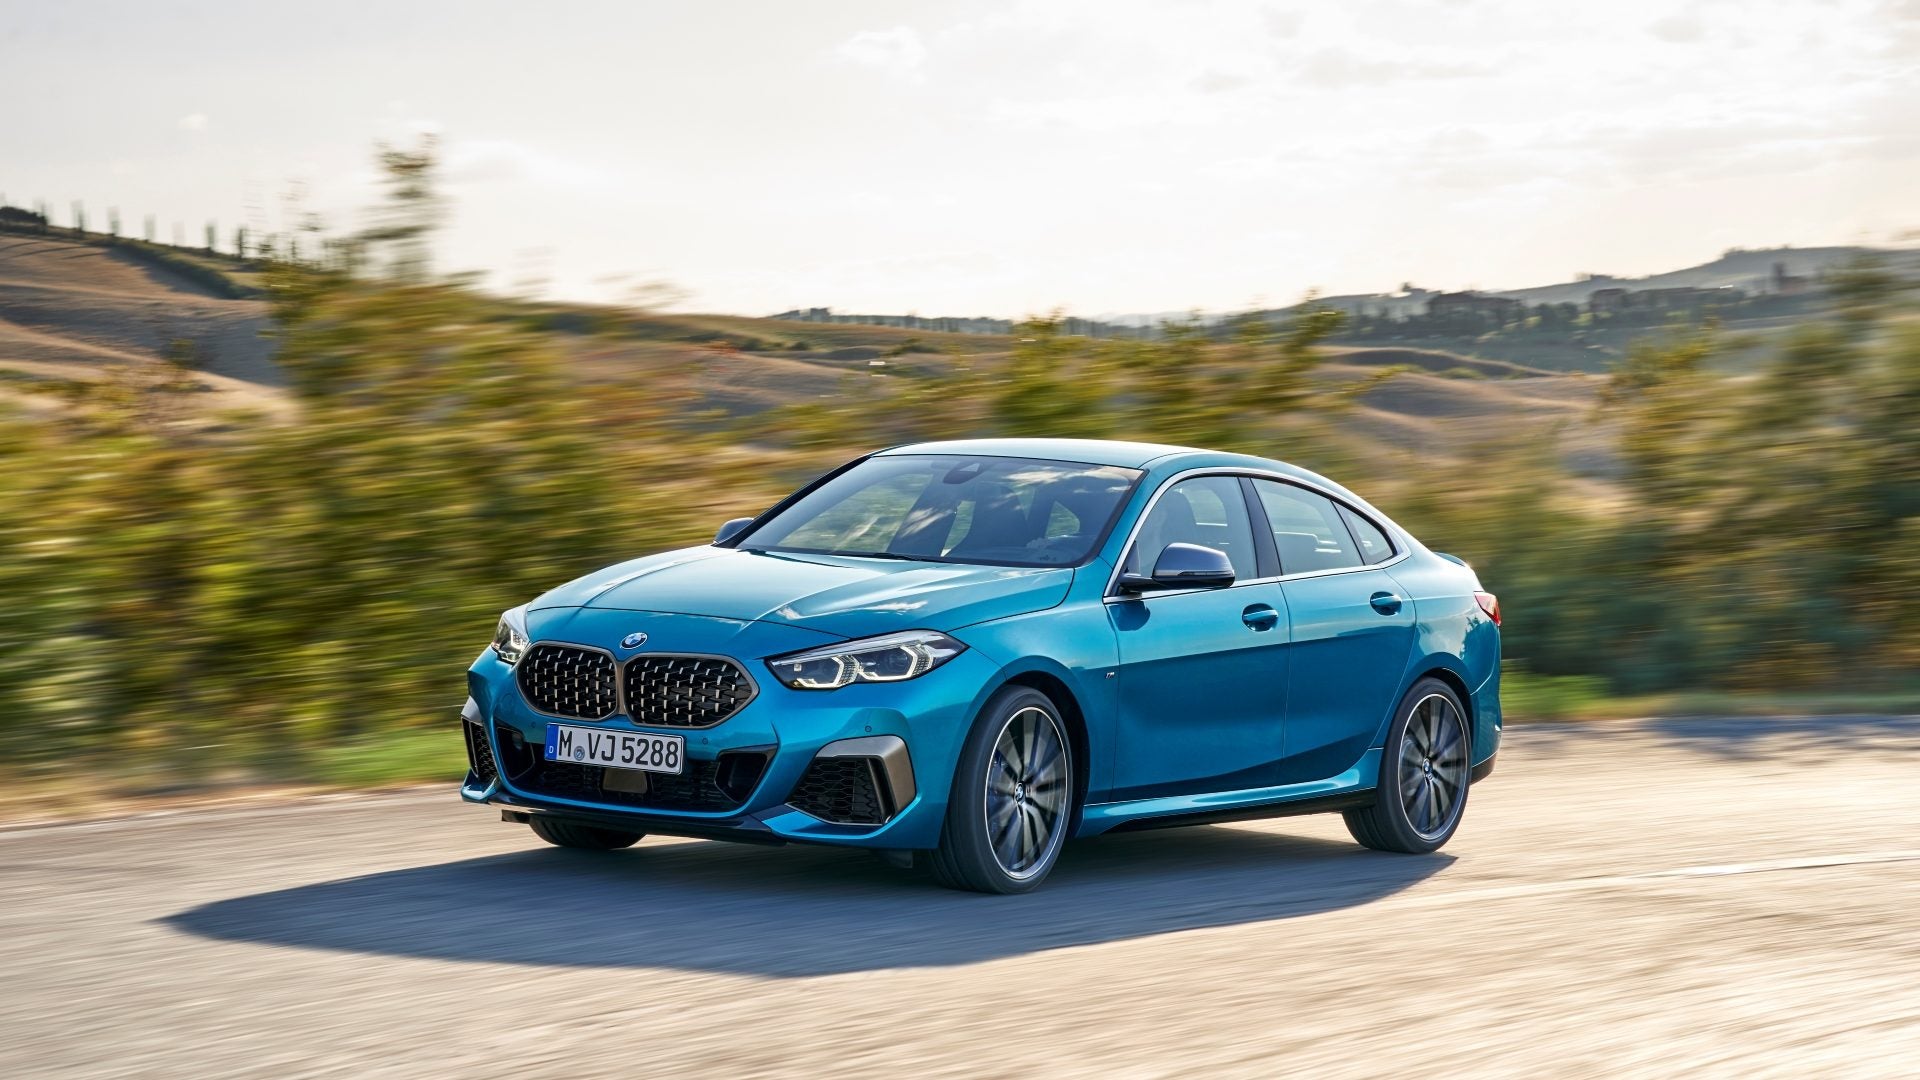 2020 BMW 2 Series Gran Coupe: The Entry-Level Four-Door Coupe